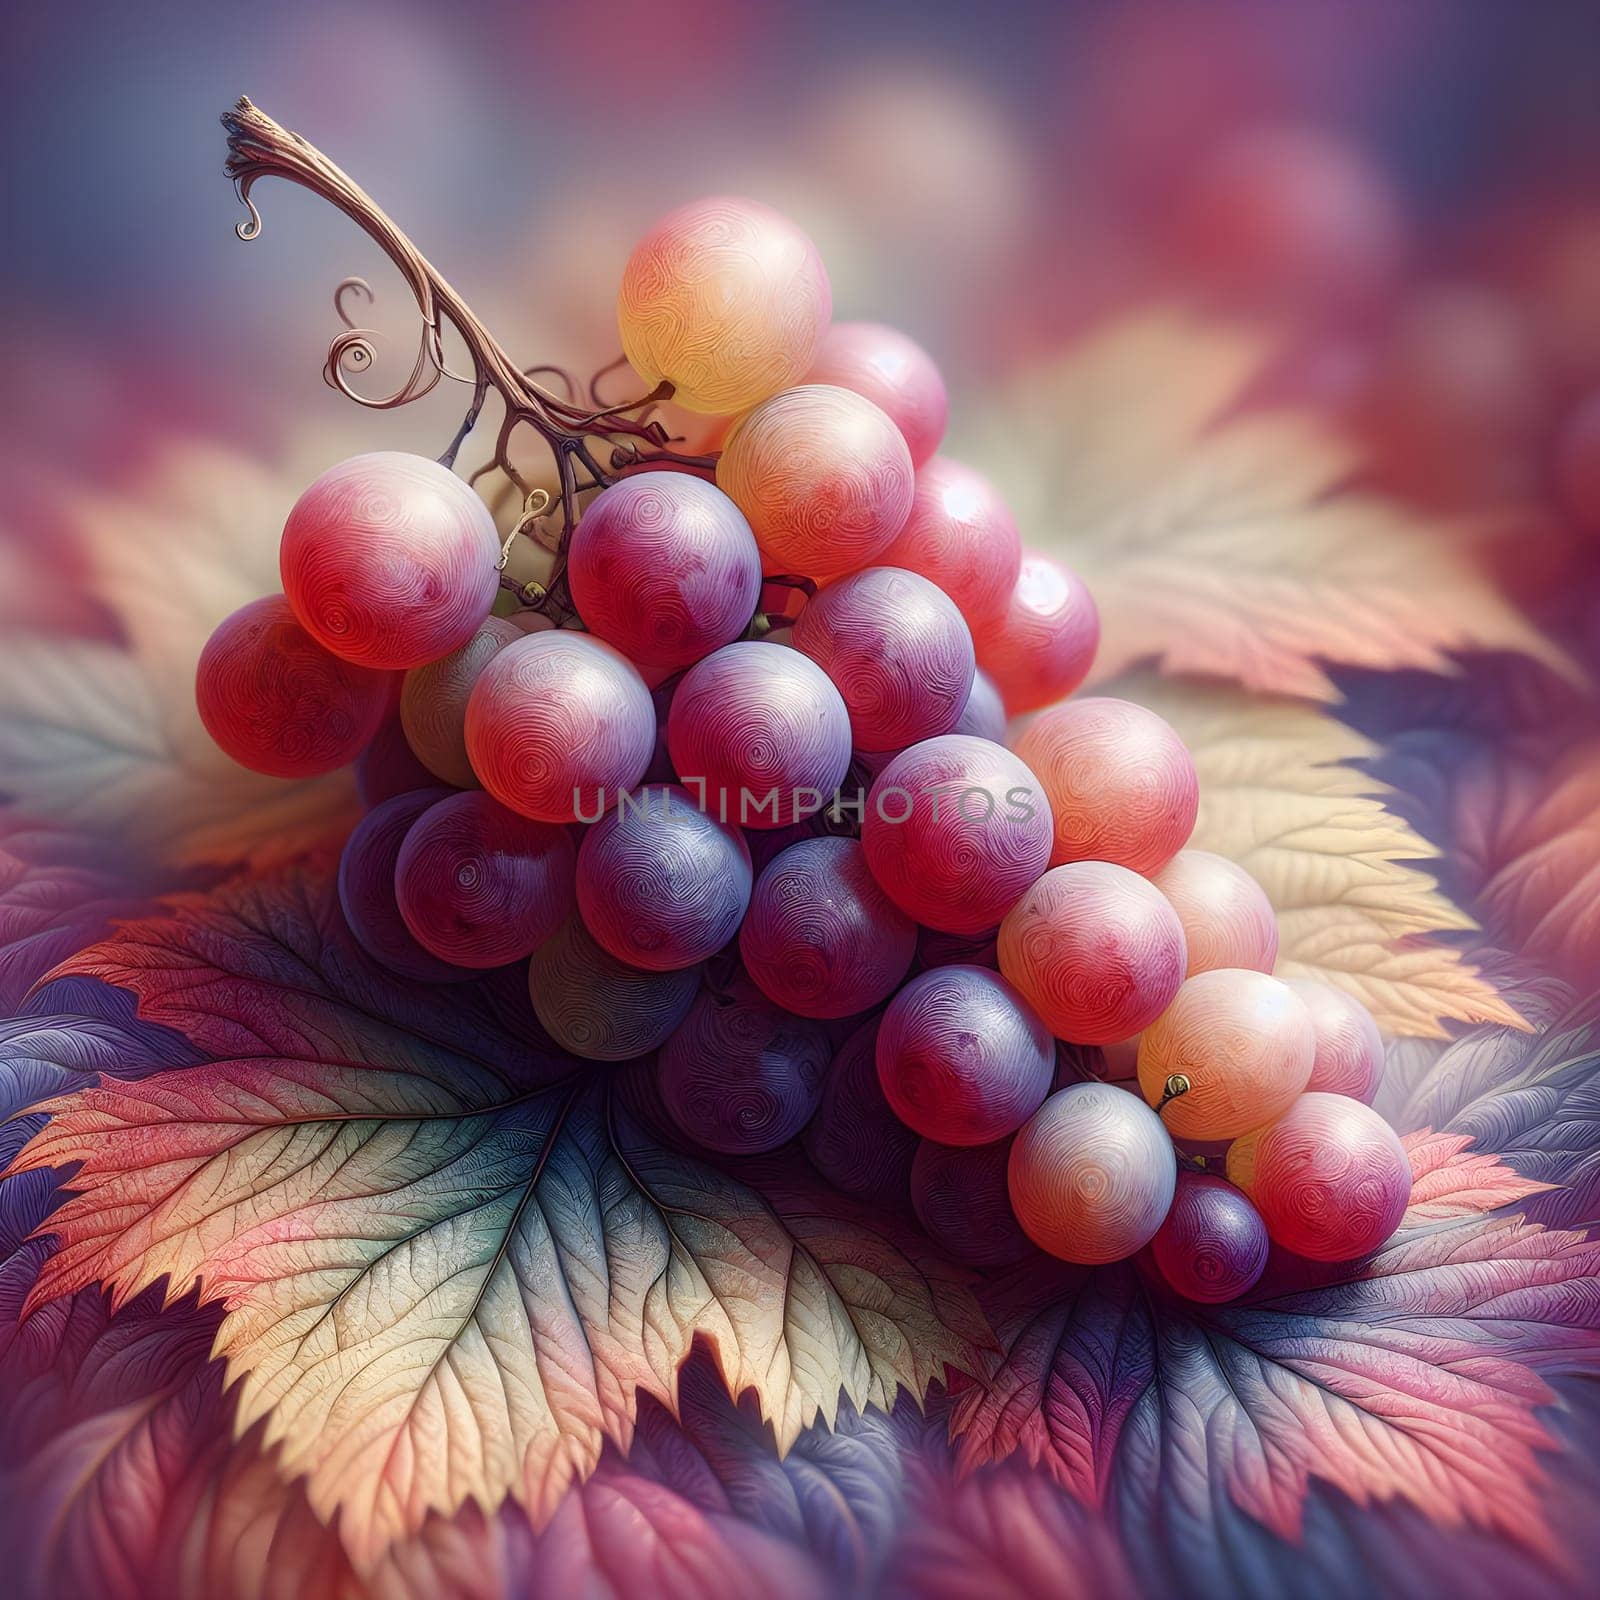 A bunch of grapes, neatly arranged and isolated on a white background. High quality photo